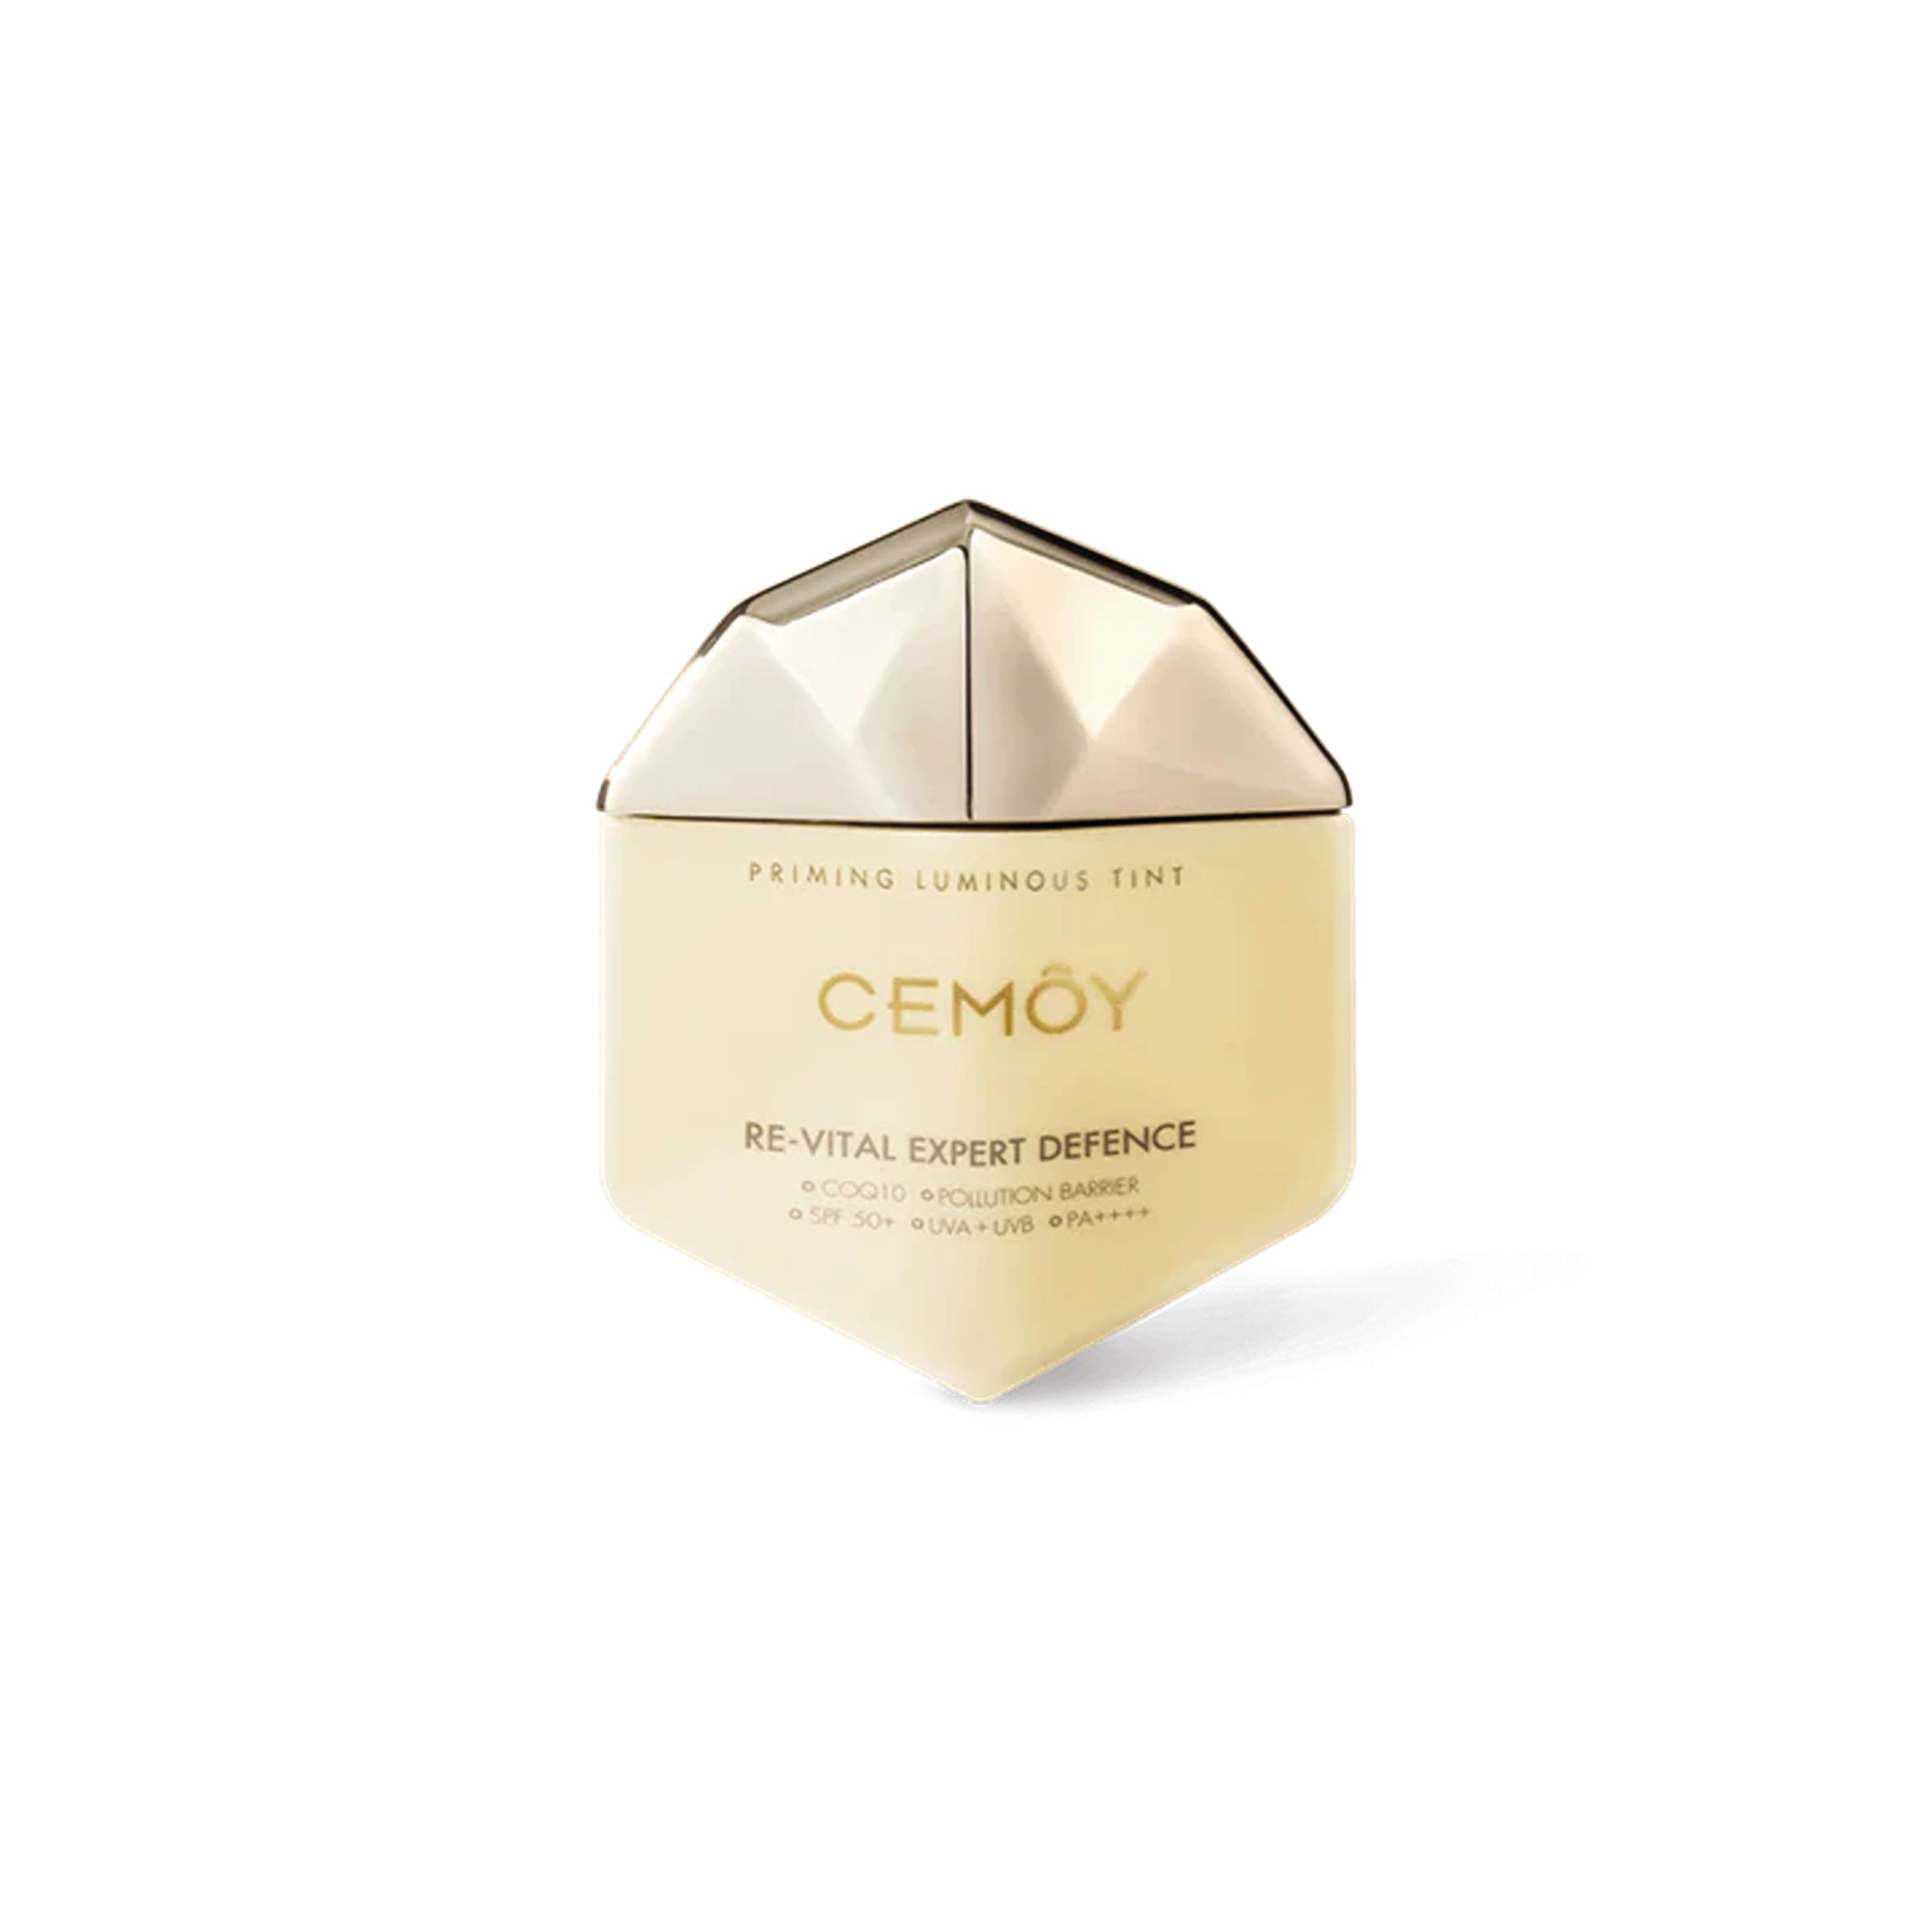 CEMOY Re-vital Expert Defence 50g